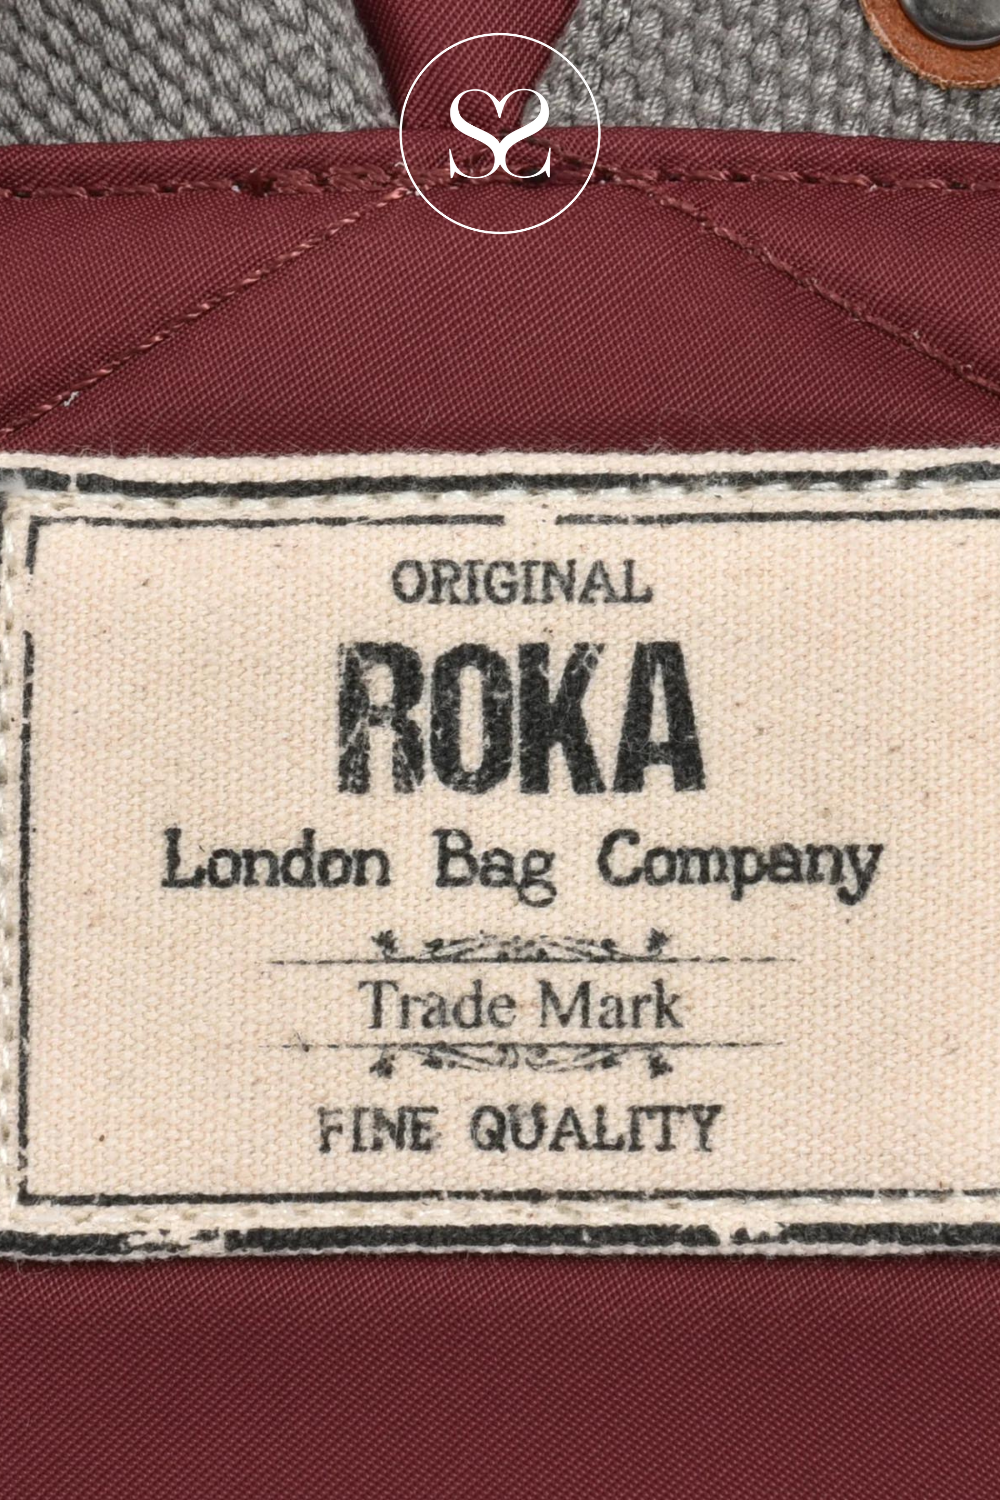 ROKA CANFIELD B SMALL WINE WATERPROOF BACKPACK WITH MULTIPLE POCKETS AND EXTENDABLE FOLDOVER TOP. GREY STRAP